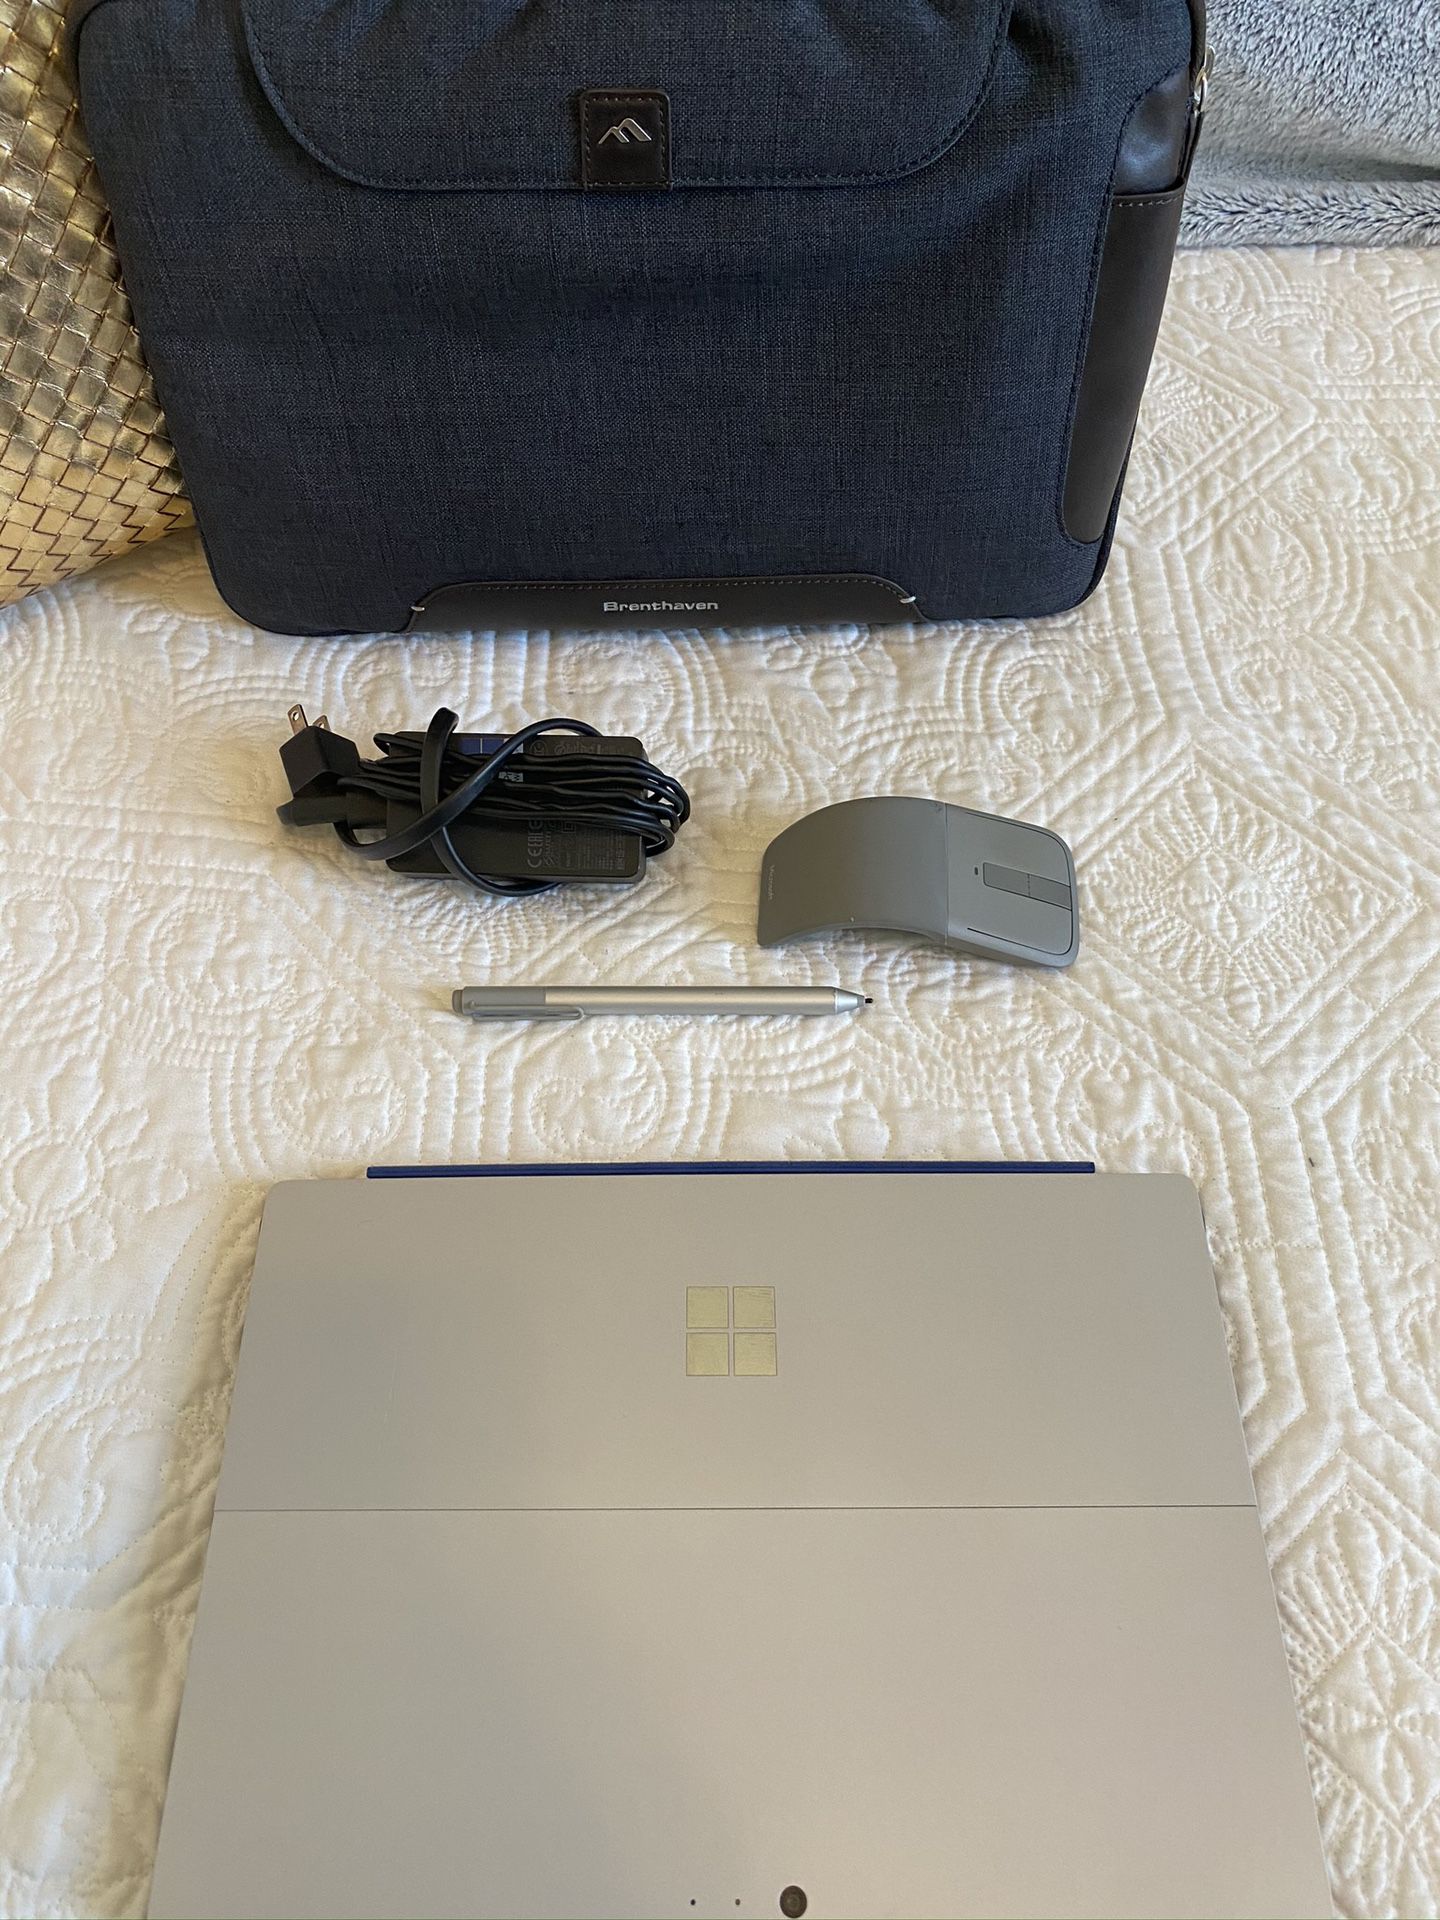 Microsoft Surface Pro 4. Mouse, Stylus, Case Charger